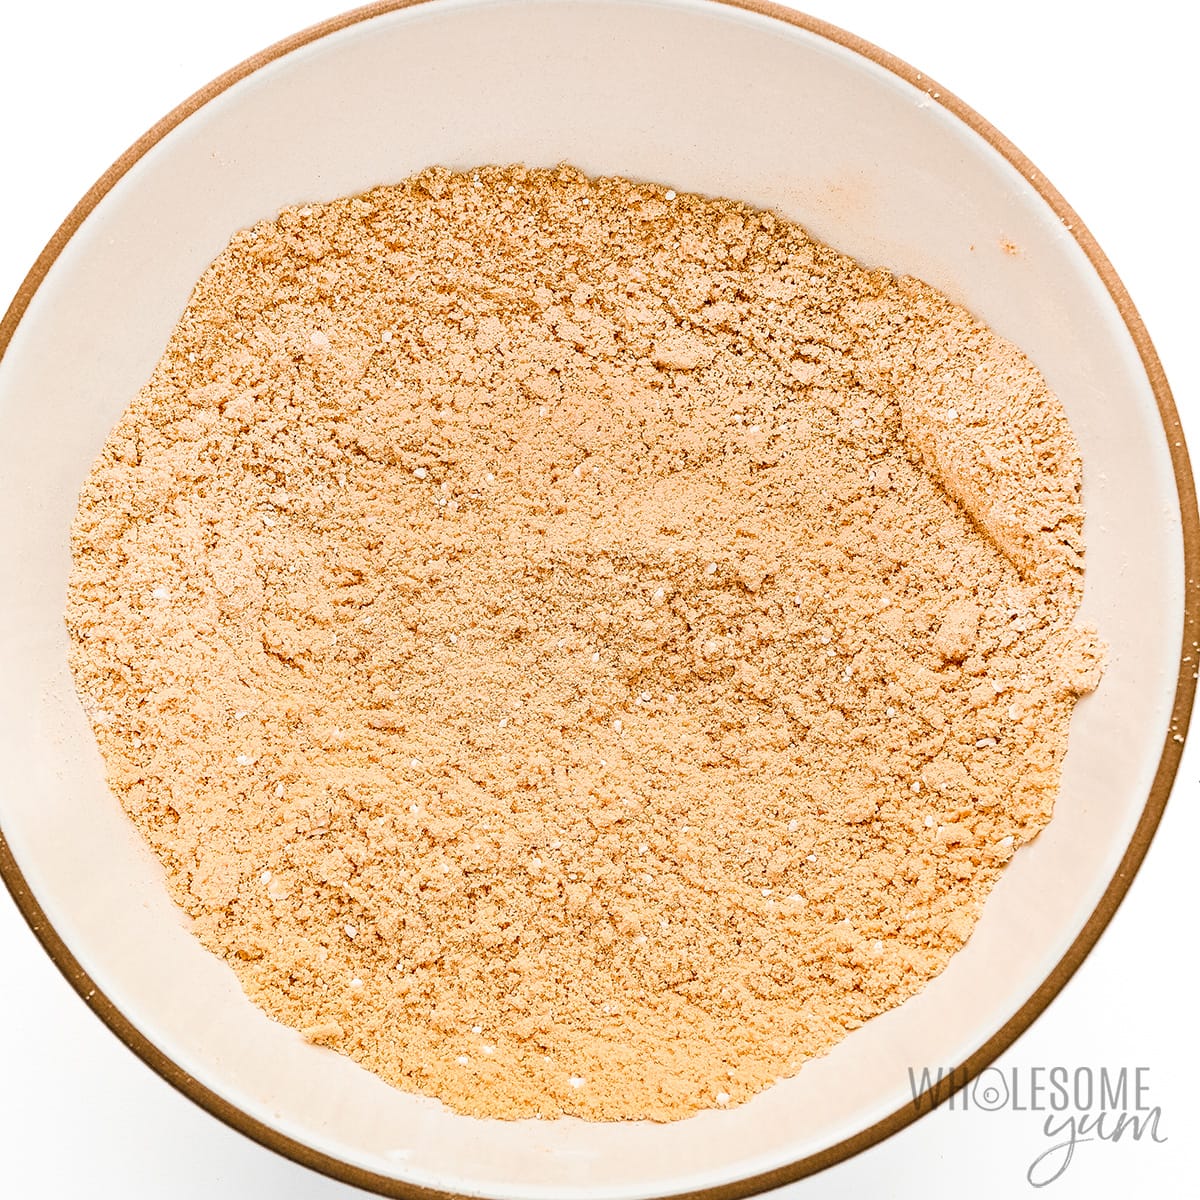 Dry ingredients mixed in a bowl.